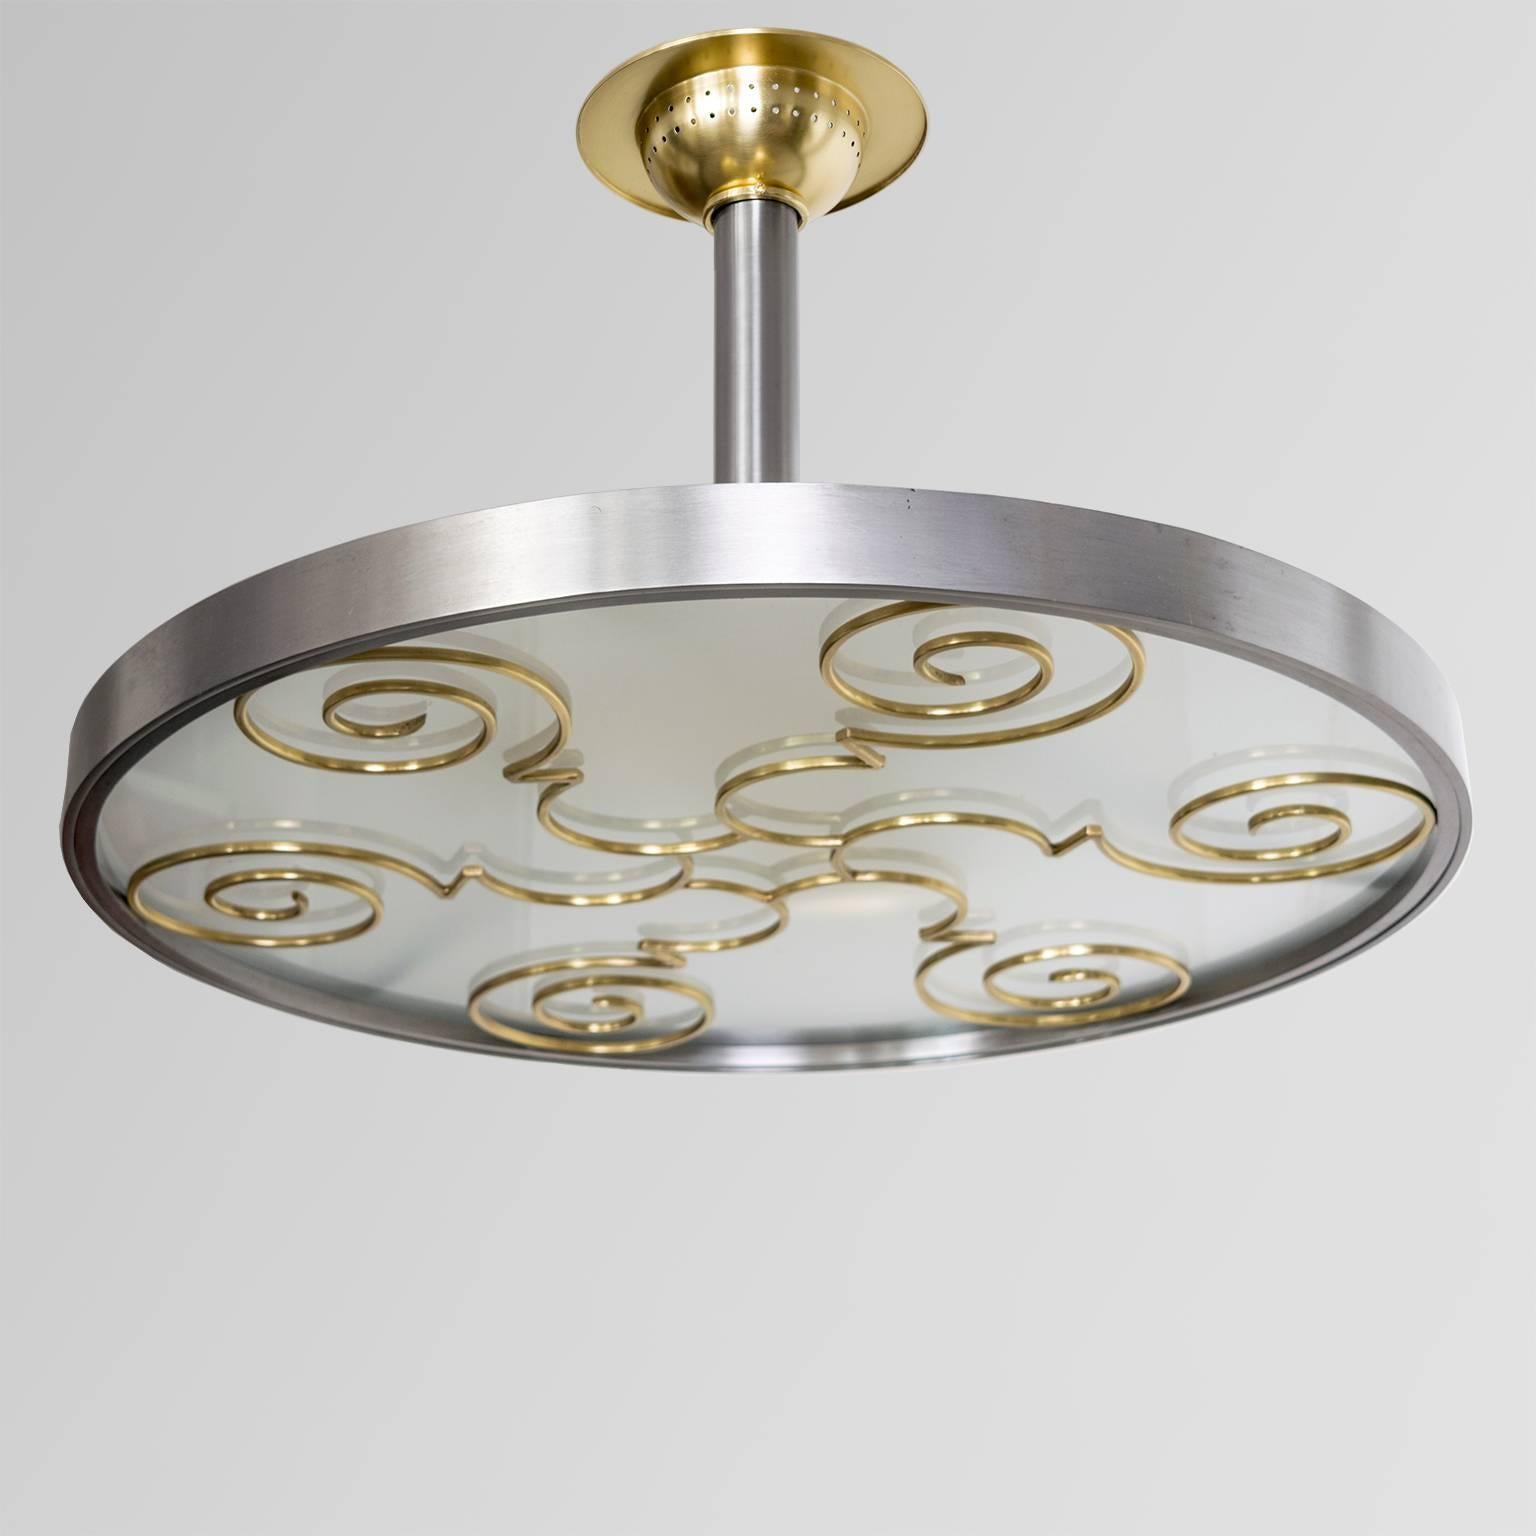 Scandinavian modern steel, brass and glass pendant fixture designed by Lars Holmstrom (with impressed mark). The fixture's polished steel frame holds a brass grille with six spirals below an acid etched original glass diffuser. Three painted iron